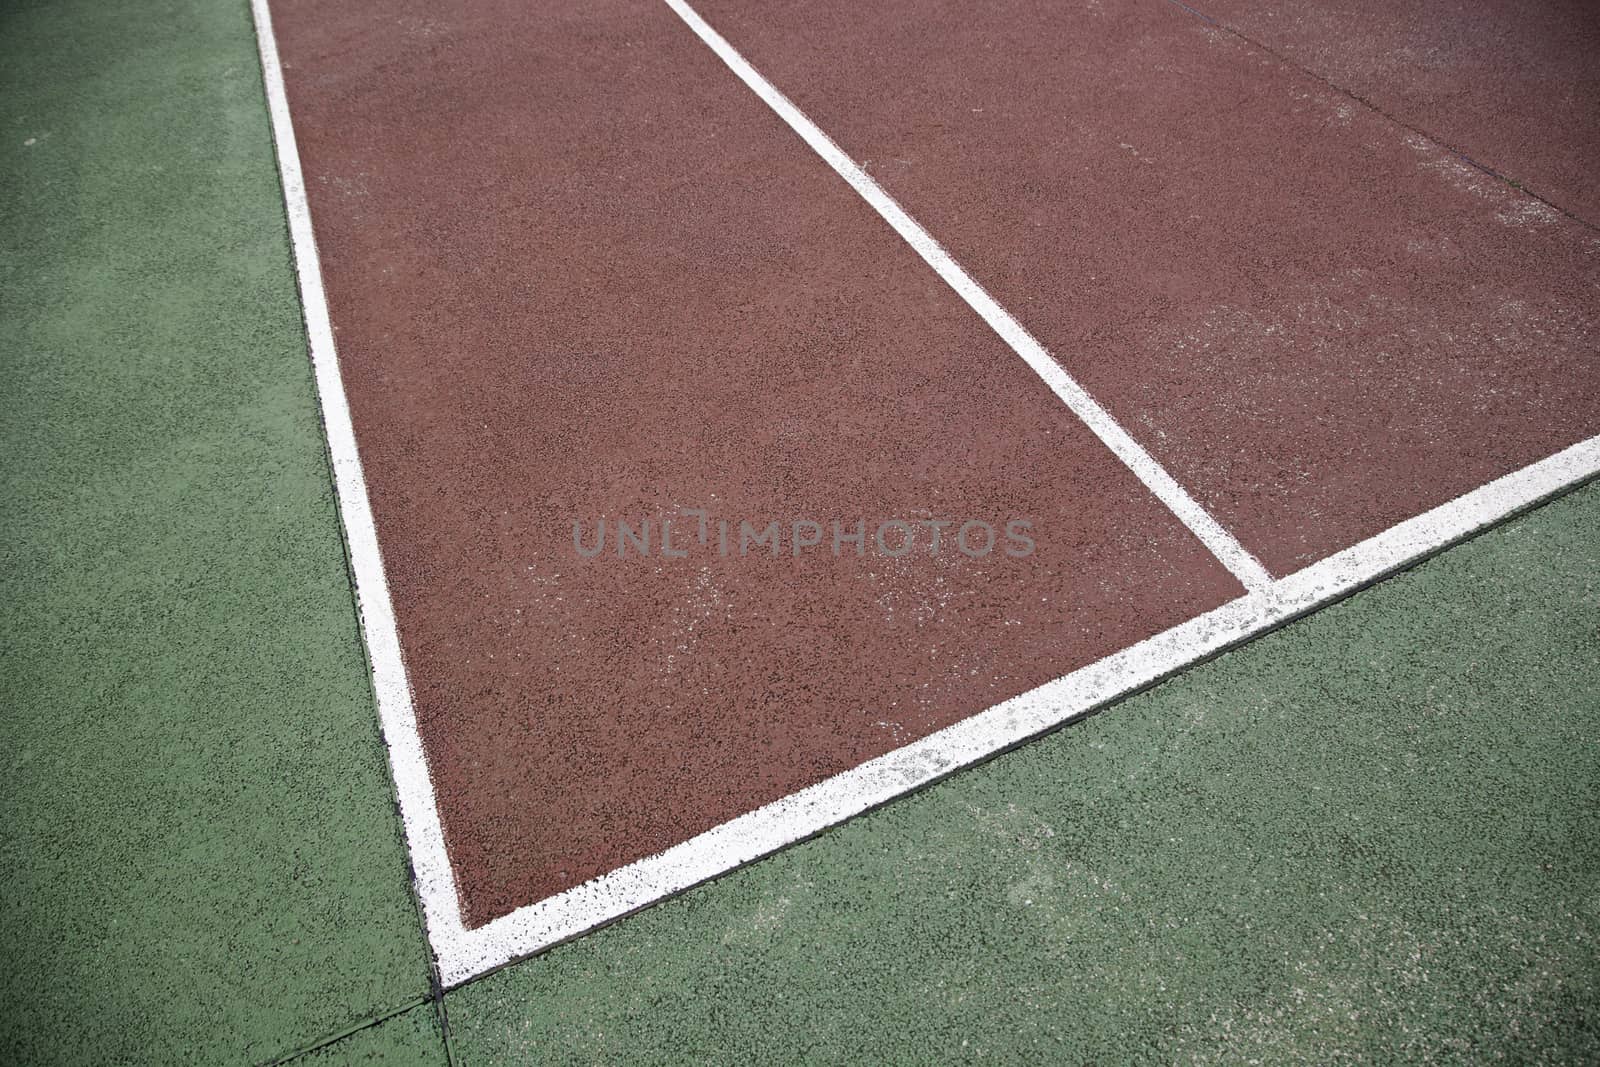 Tennis Court, detail of a track to play tennis, detail texture background with sport